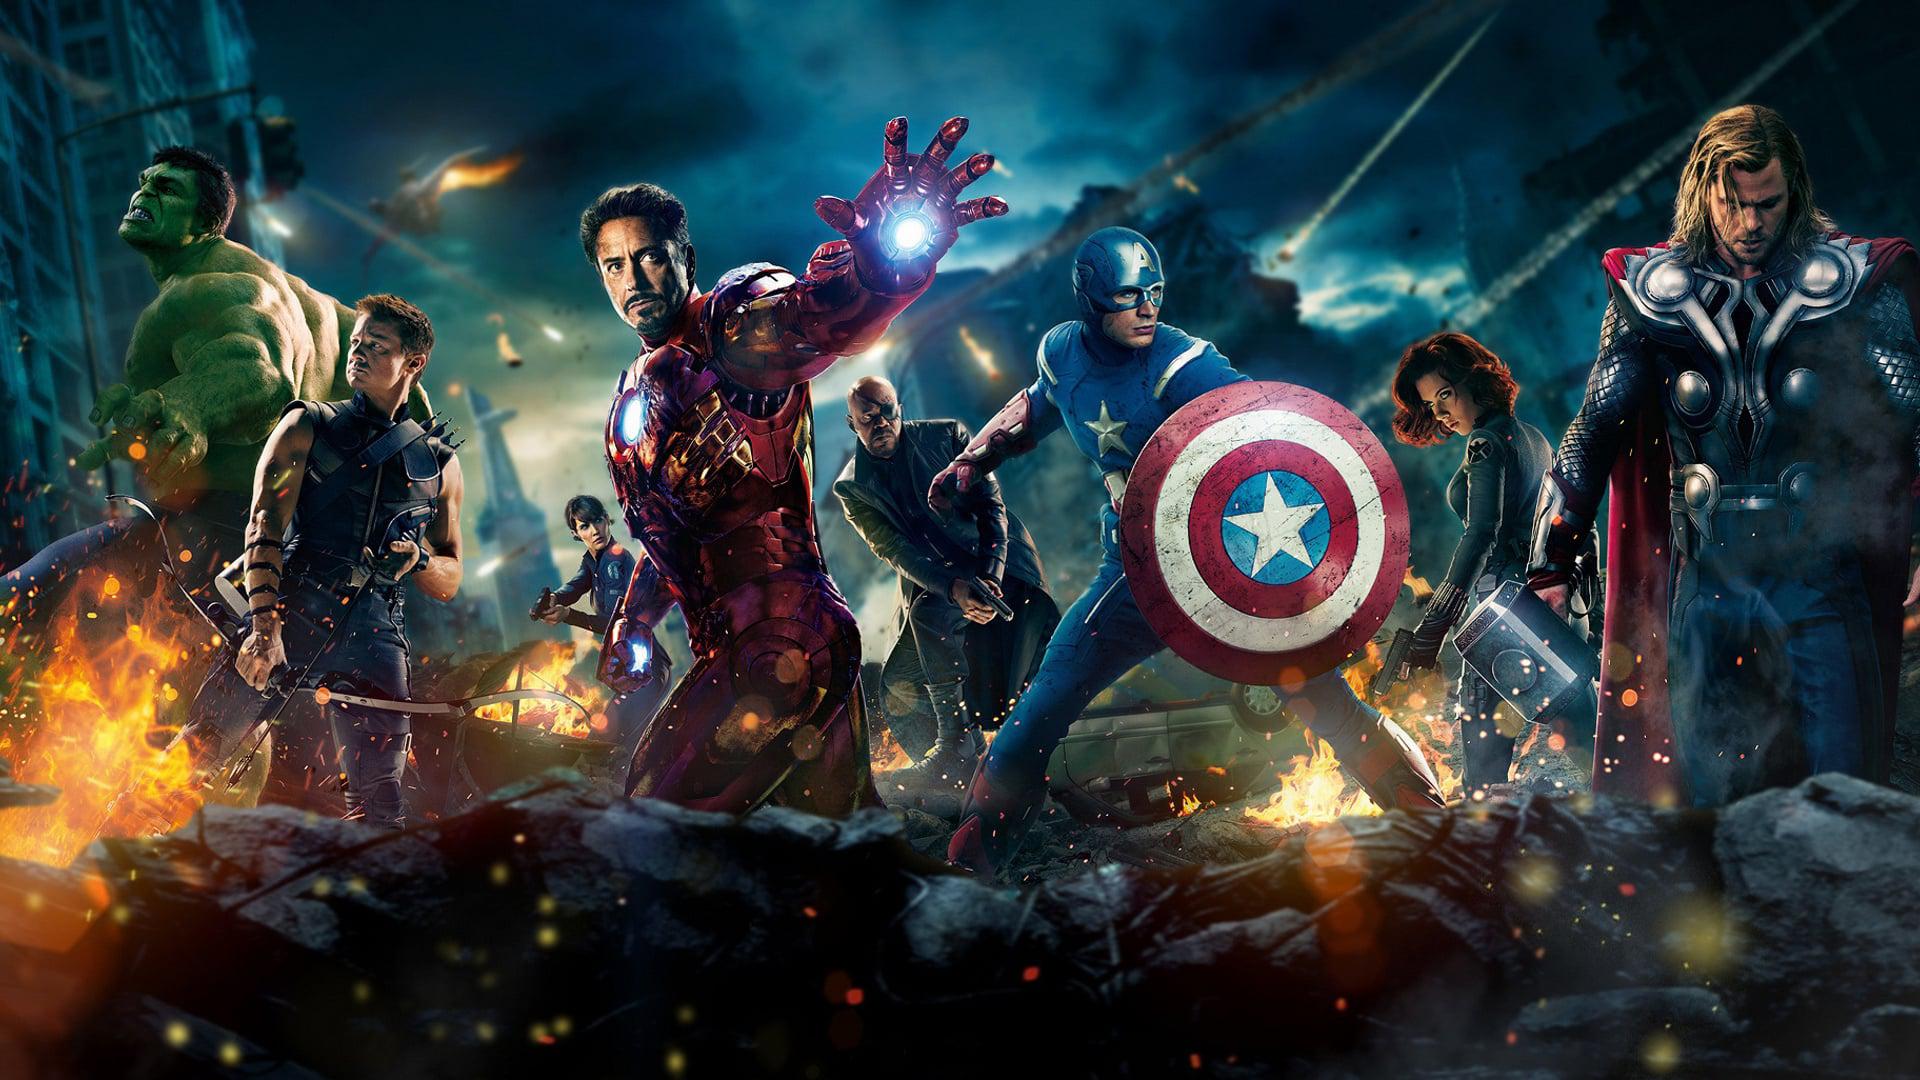 Backdrop Image for The Avengers